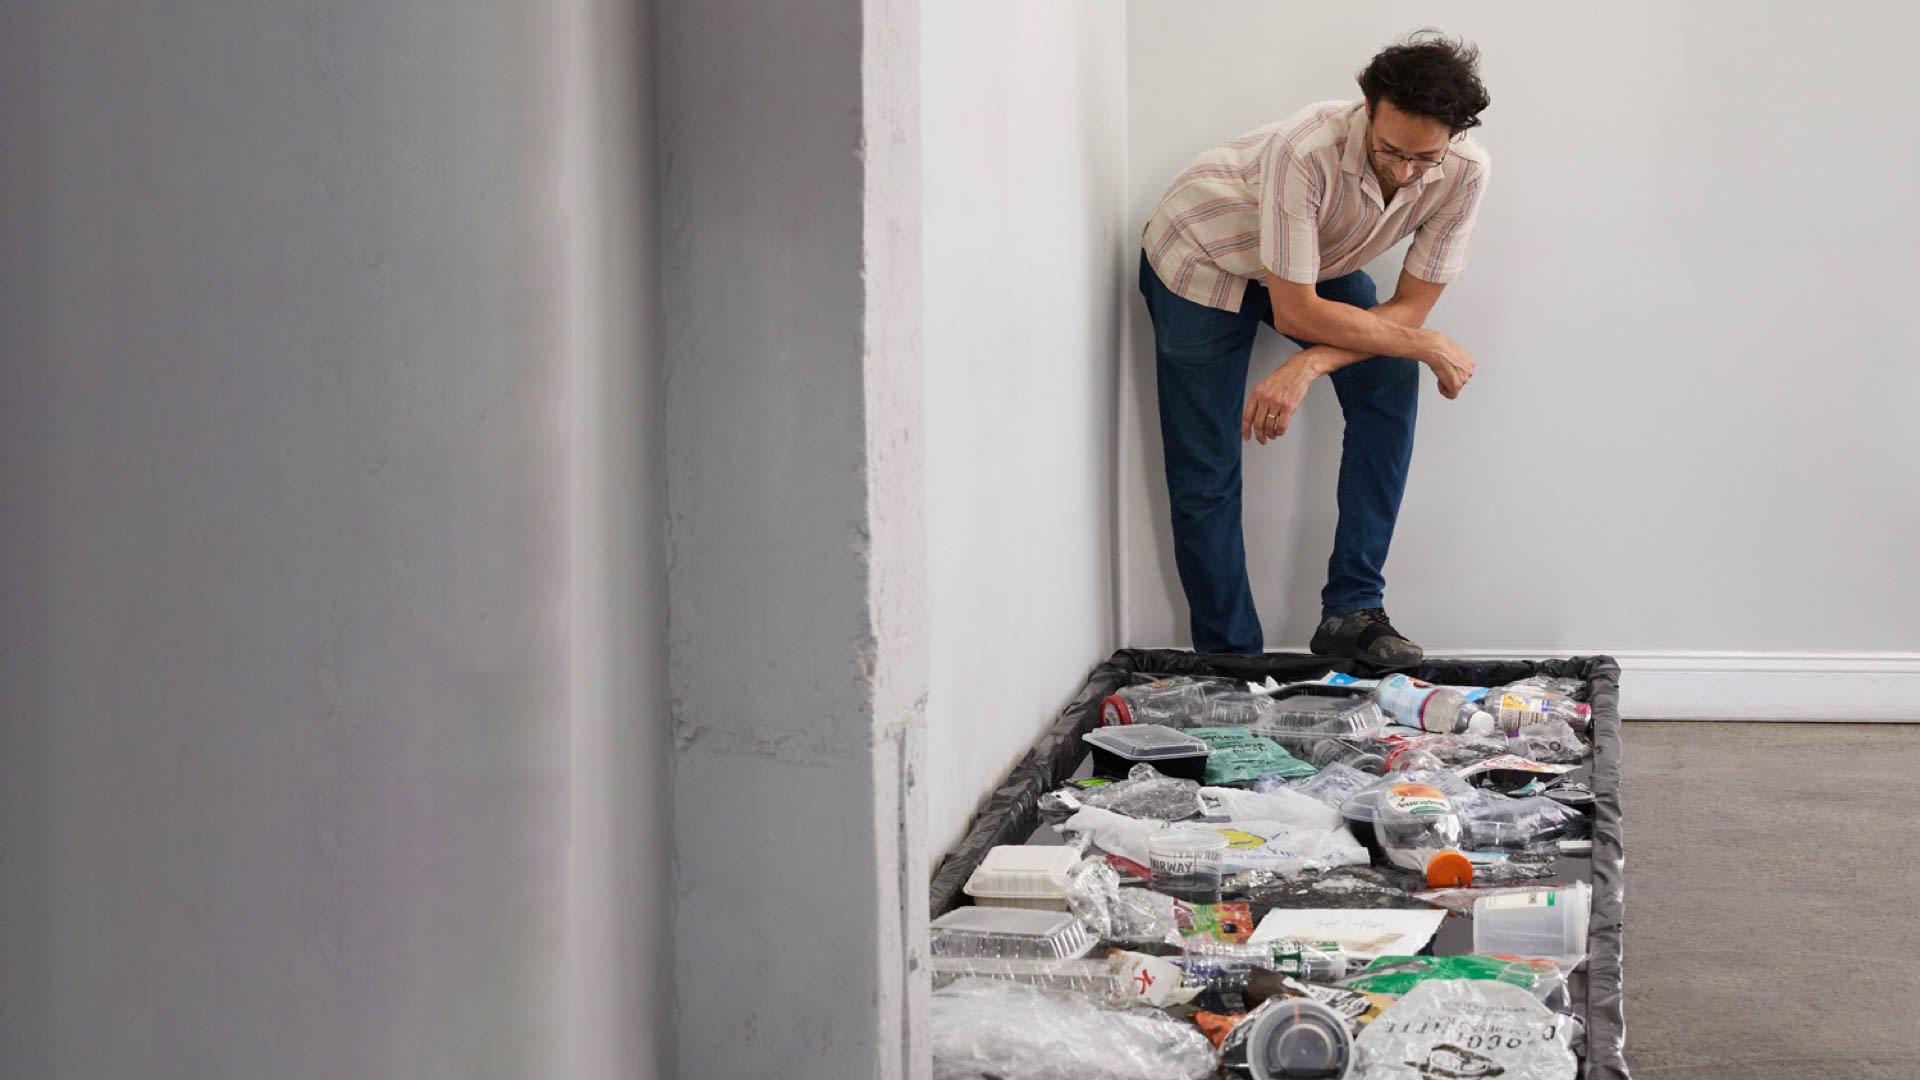 Photograph of a man (the artist) looking down on a black, rectilinear, floating pool of plastic trash